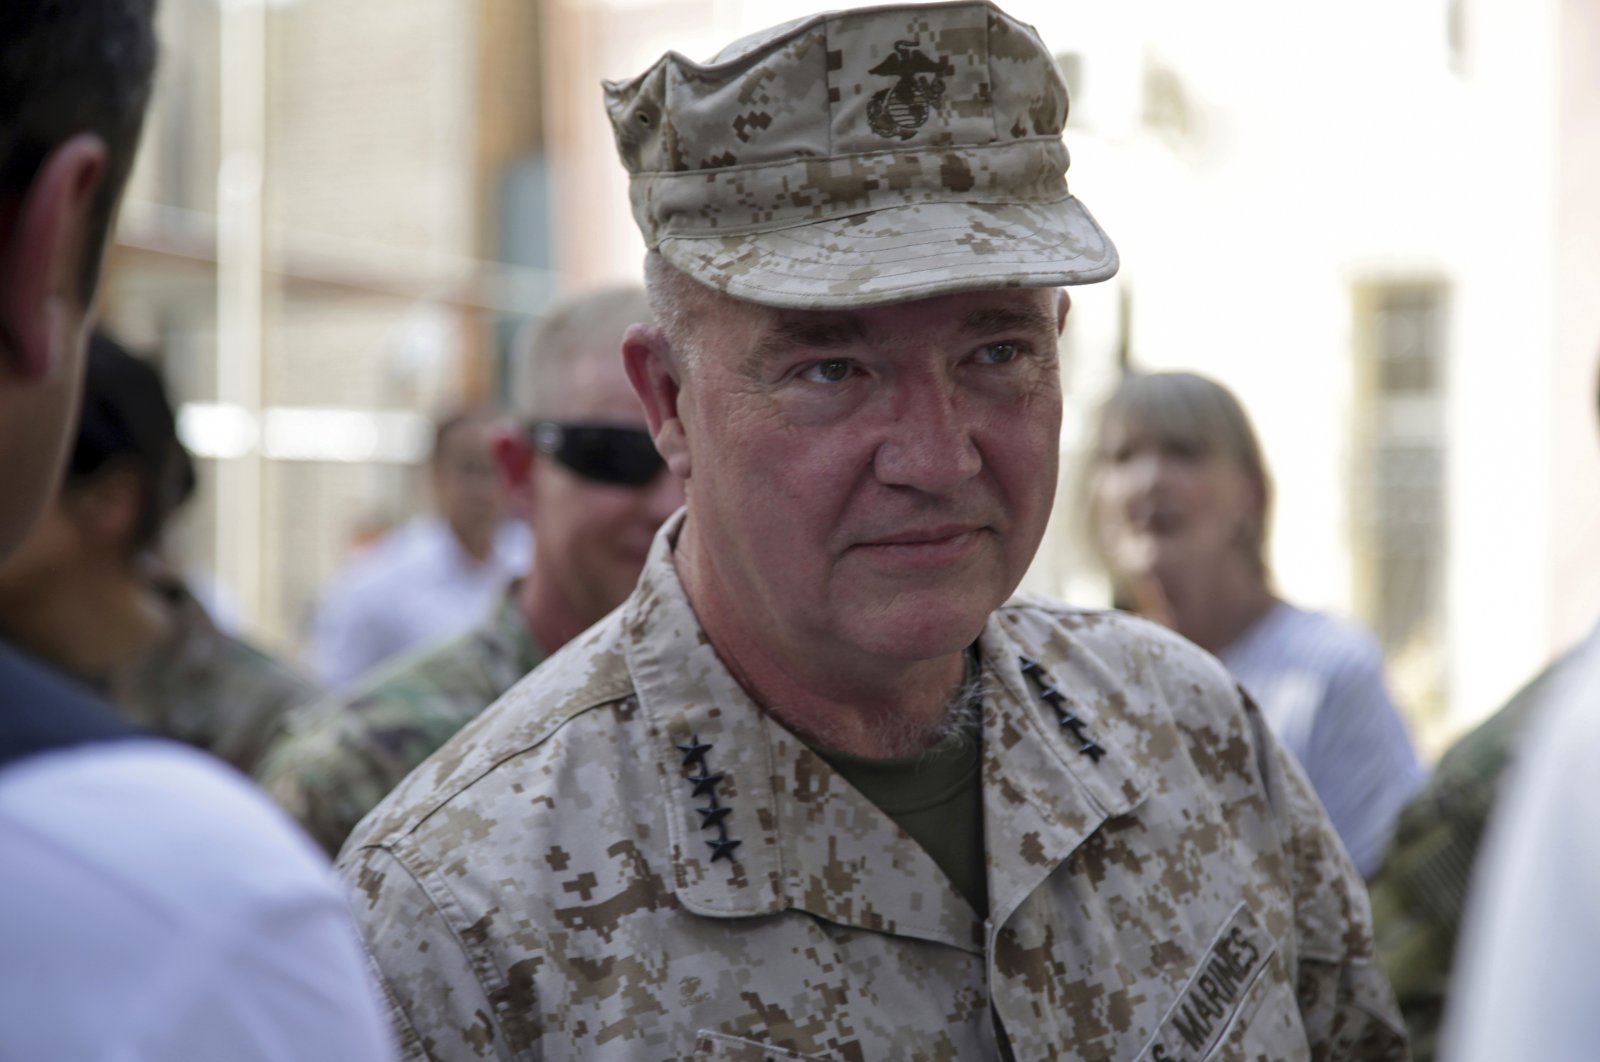 Marine Gen. Frank McKenzie, the head of U.S. Central Command, attends at a ceremony where Gen. Scott Miller, who has served as America&#039;s top commander in Afghanistan since 2018, handed over command, at Resolute Support headquarters, in Kabul, Afghanistan, July 12, 2021. (AP Photo)